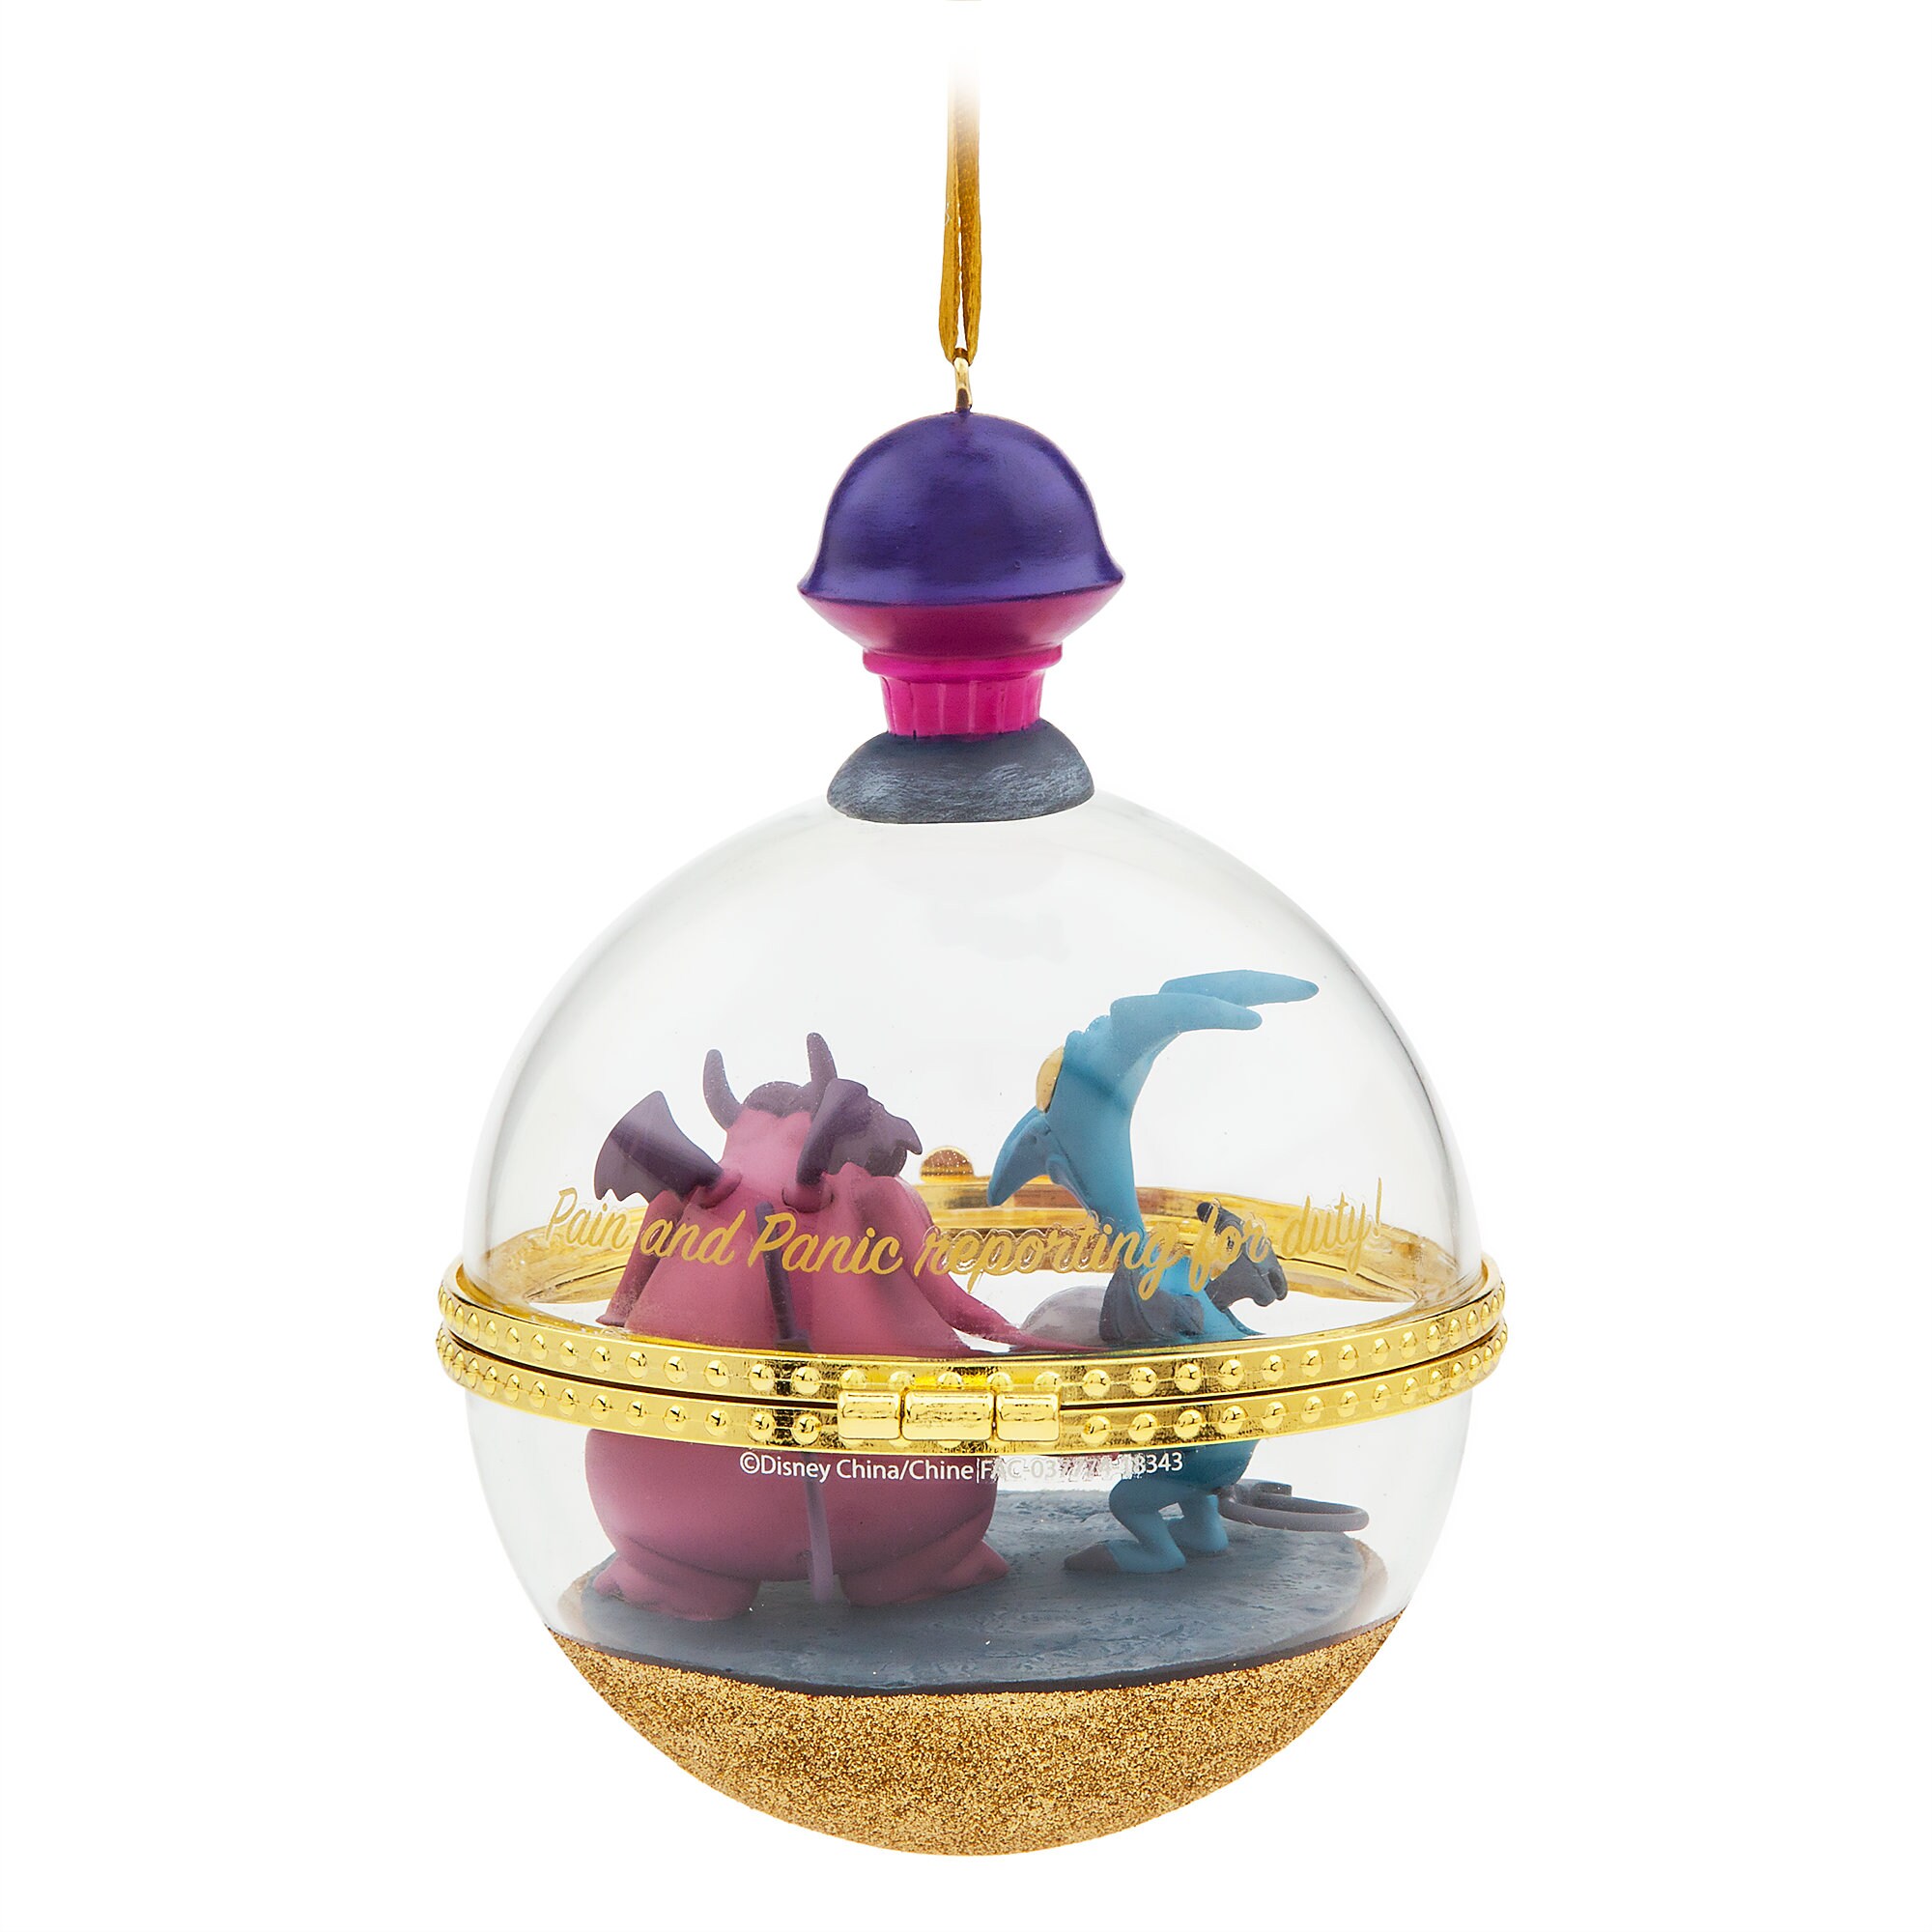 Pain and Panic Disney Duos Sketchbook Ornament - Hercules - April - Limited Release